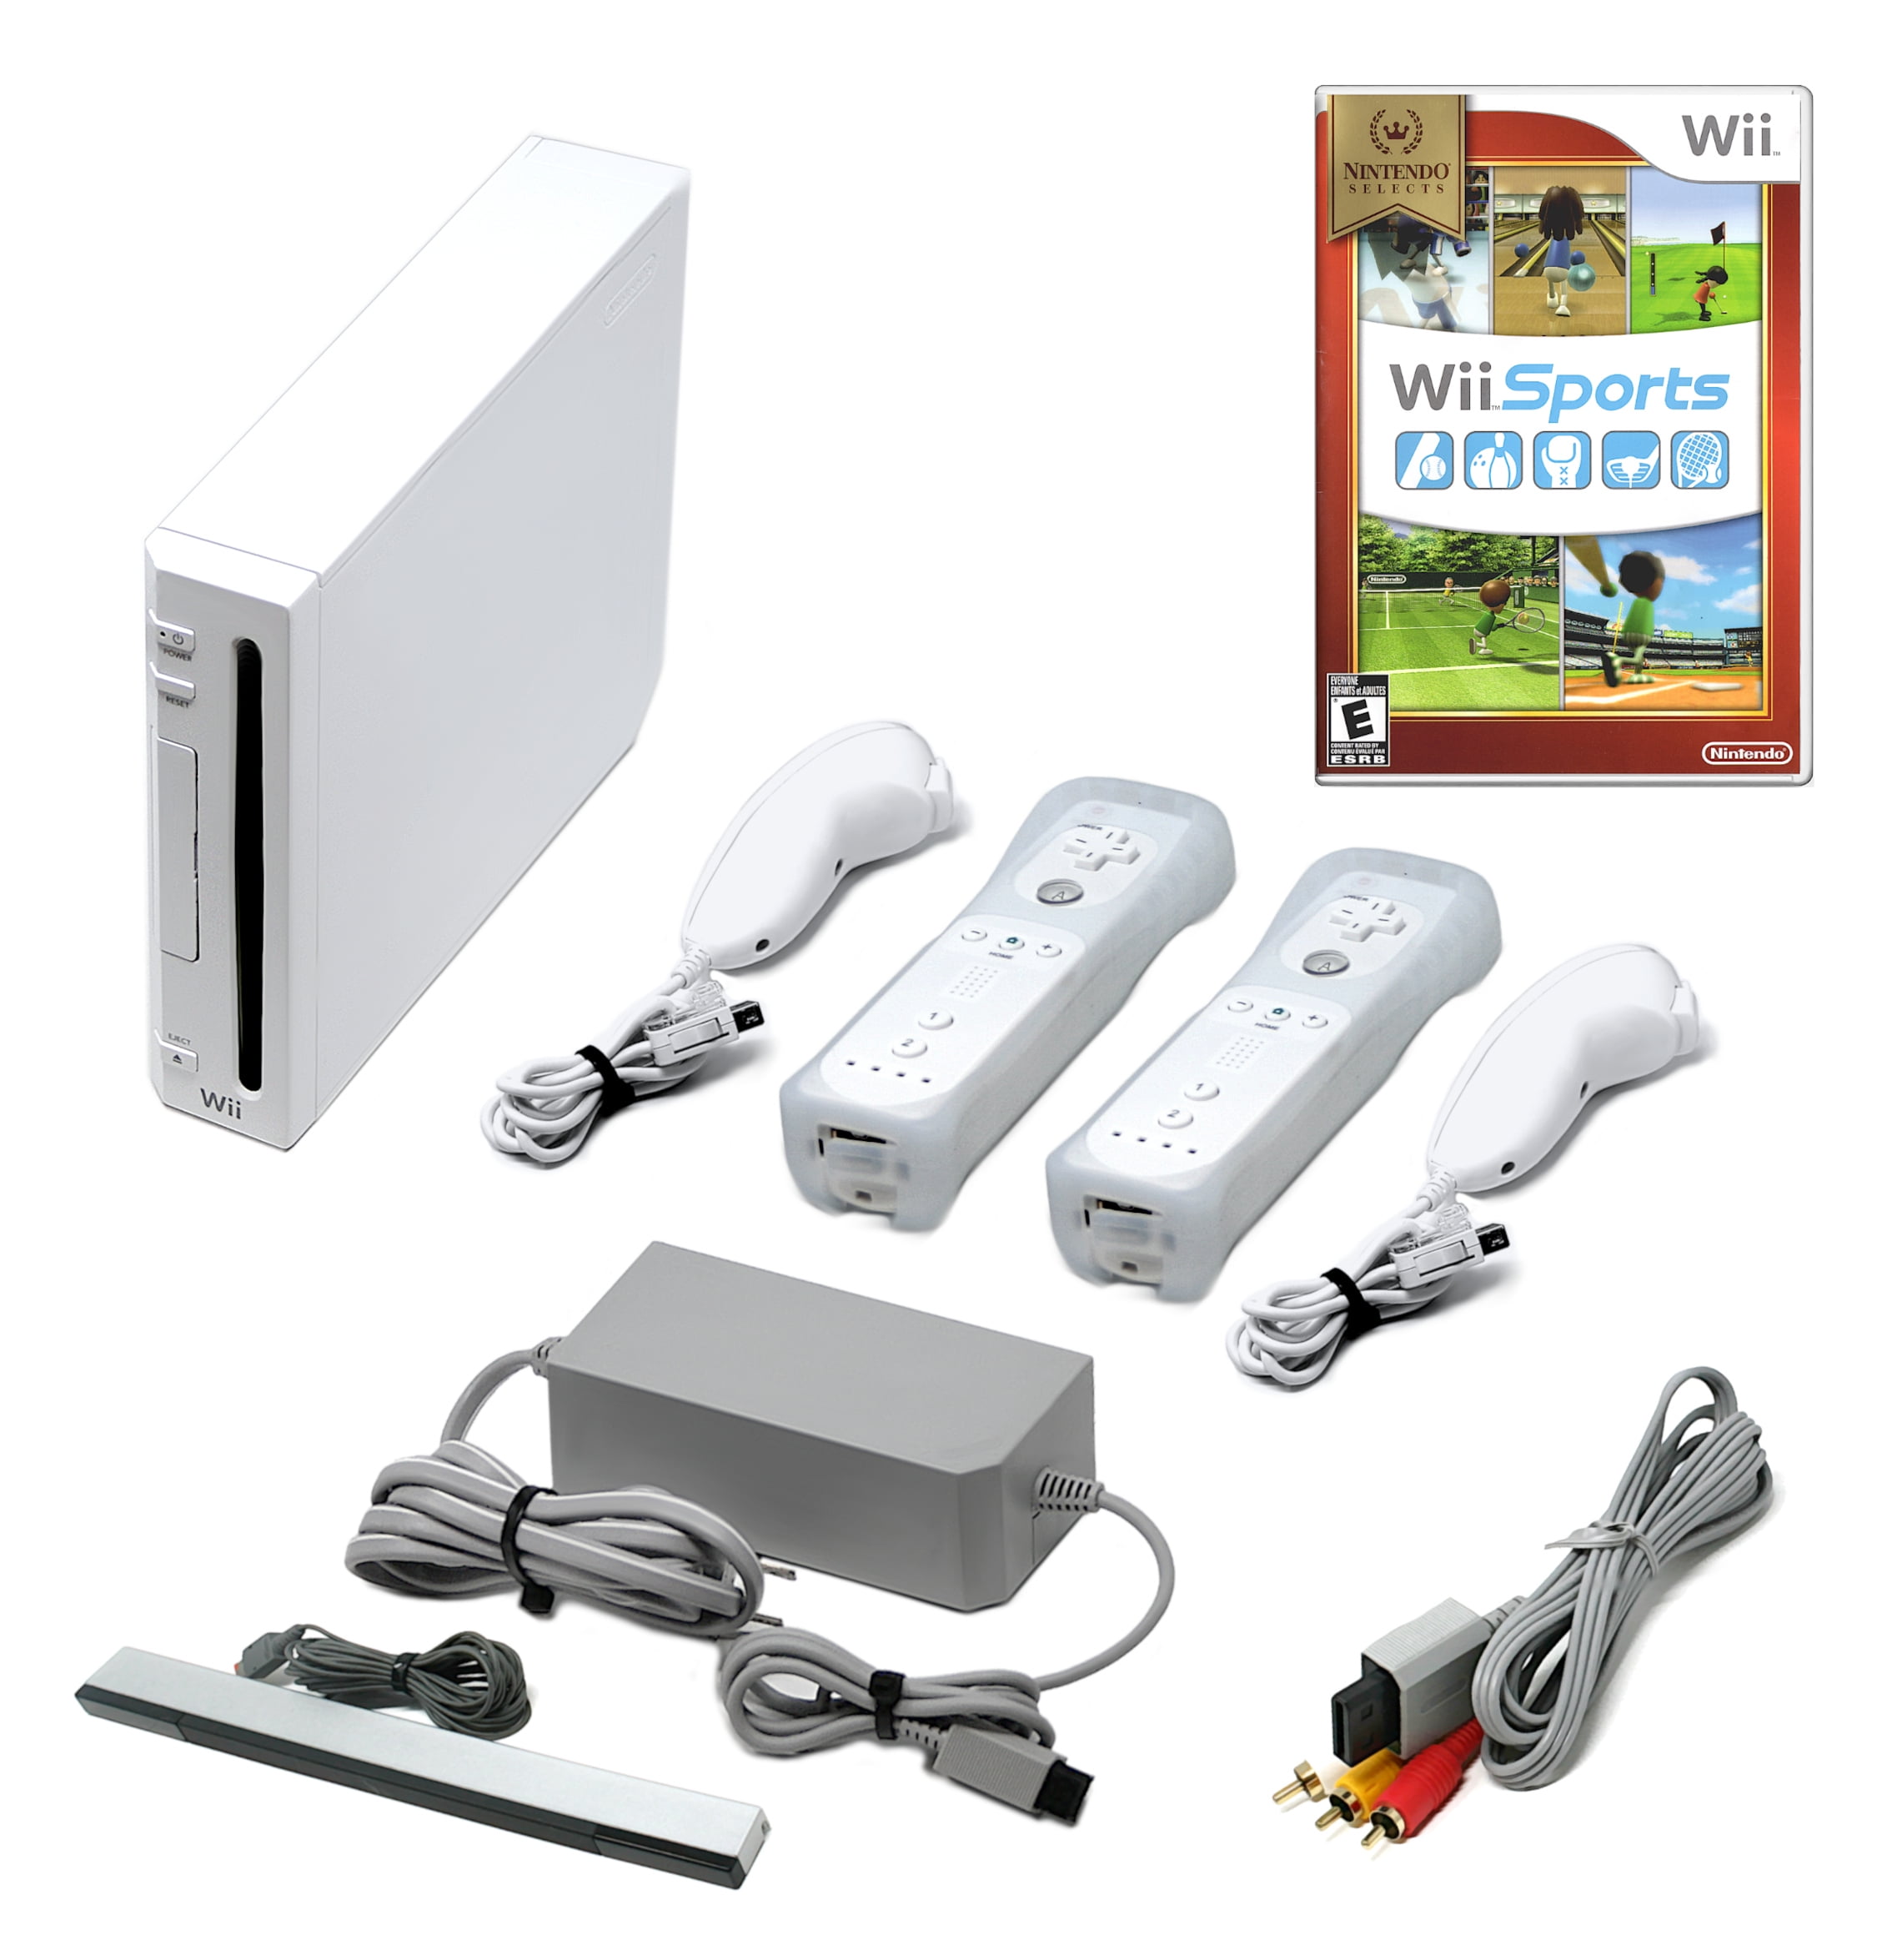 Restored Nintendo Wii Console Black with Motion Plus Controller and Nunchuk  (Refurbished) 